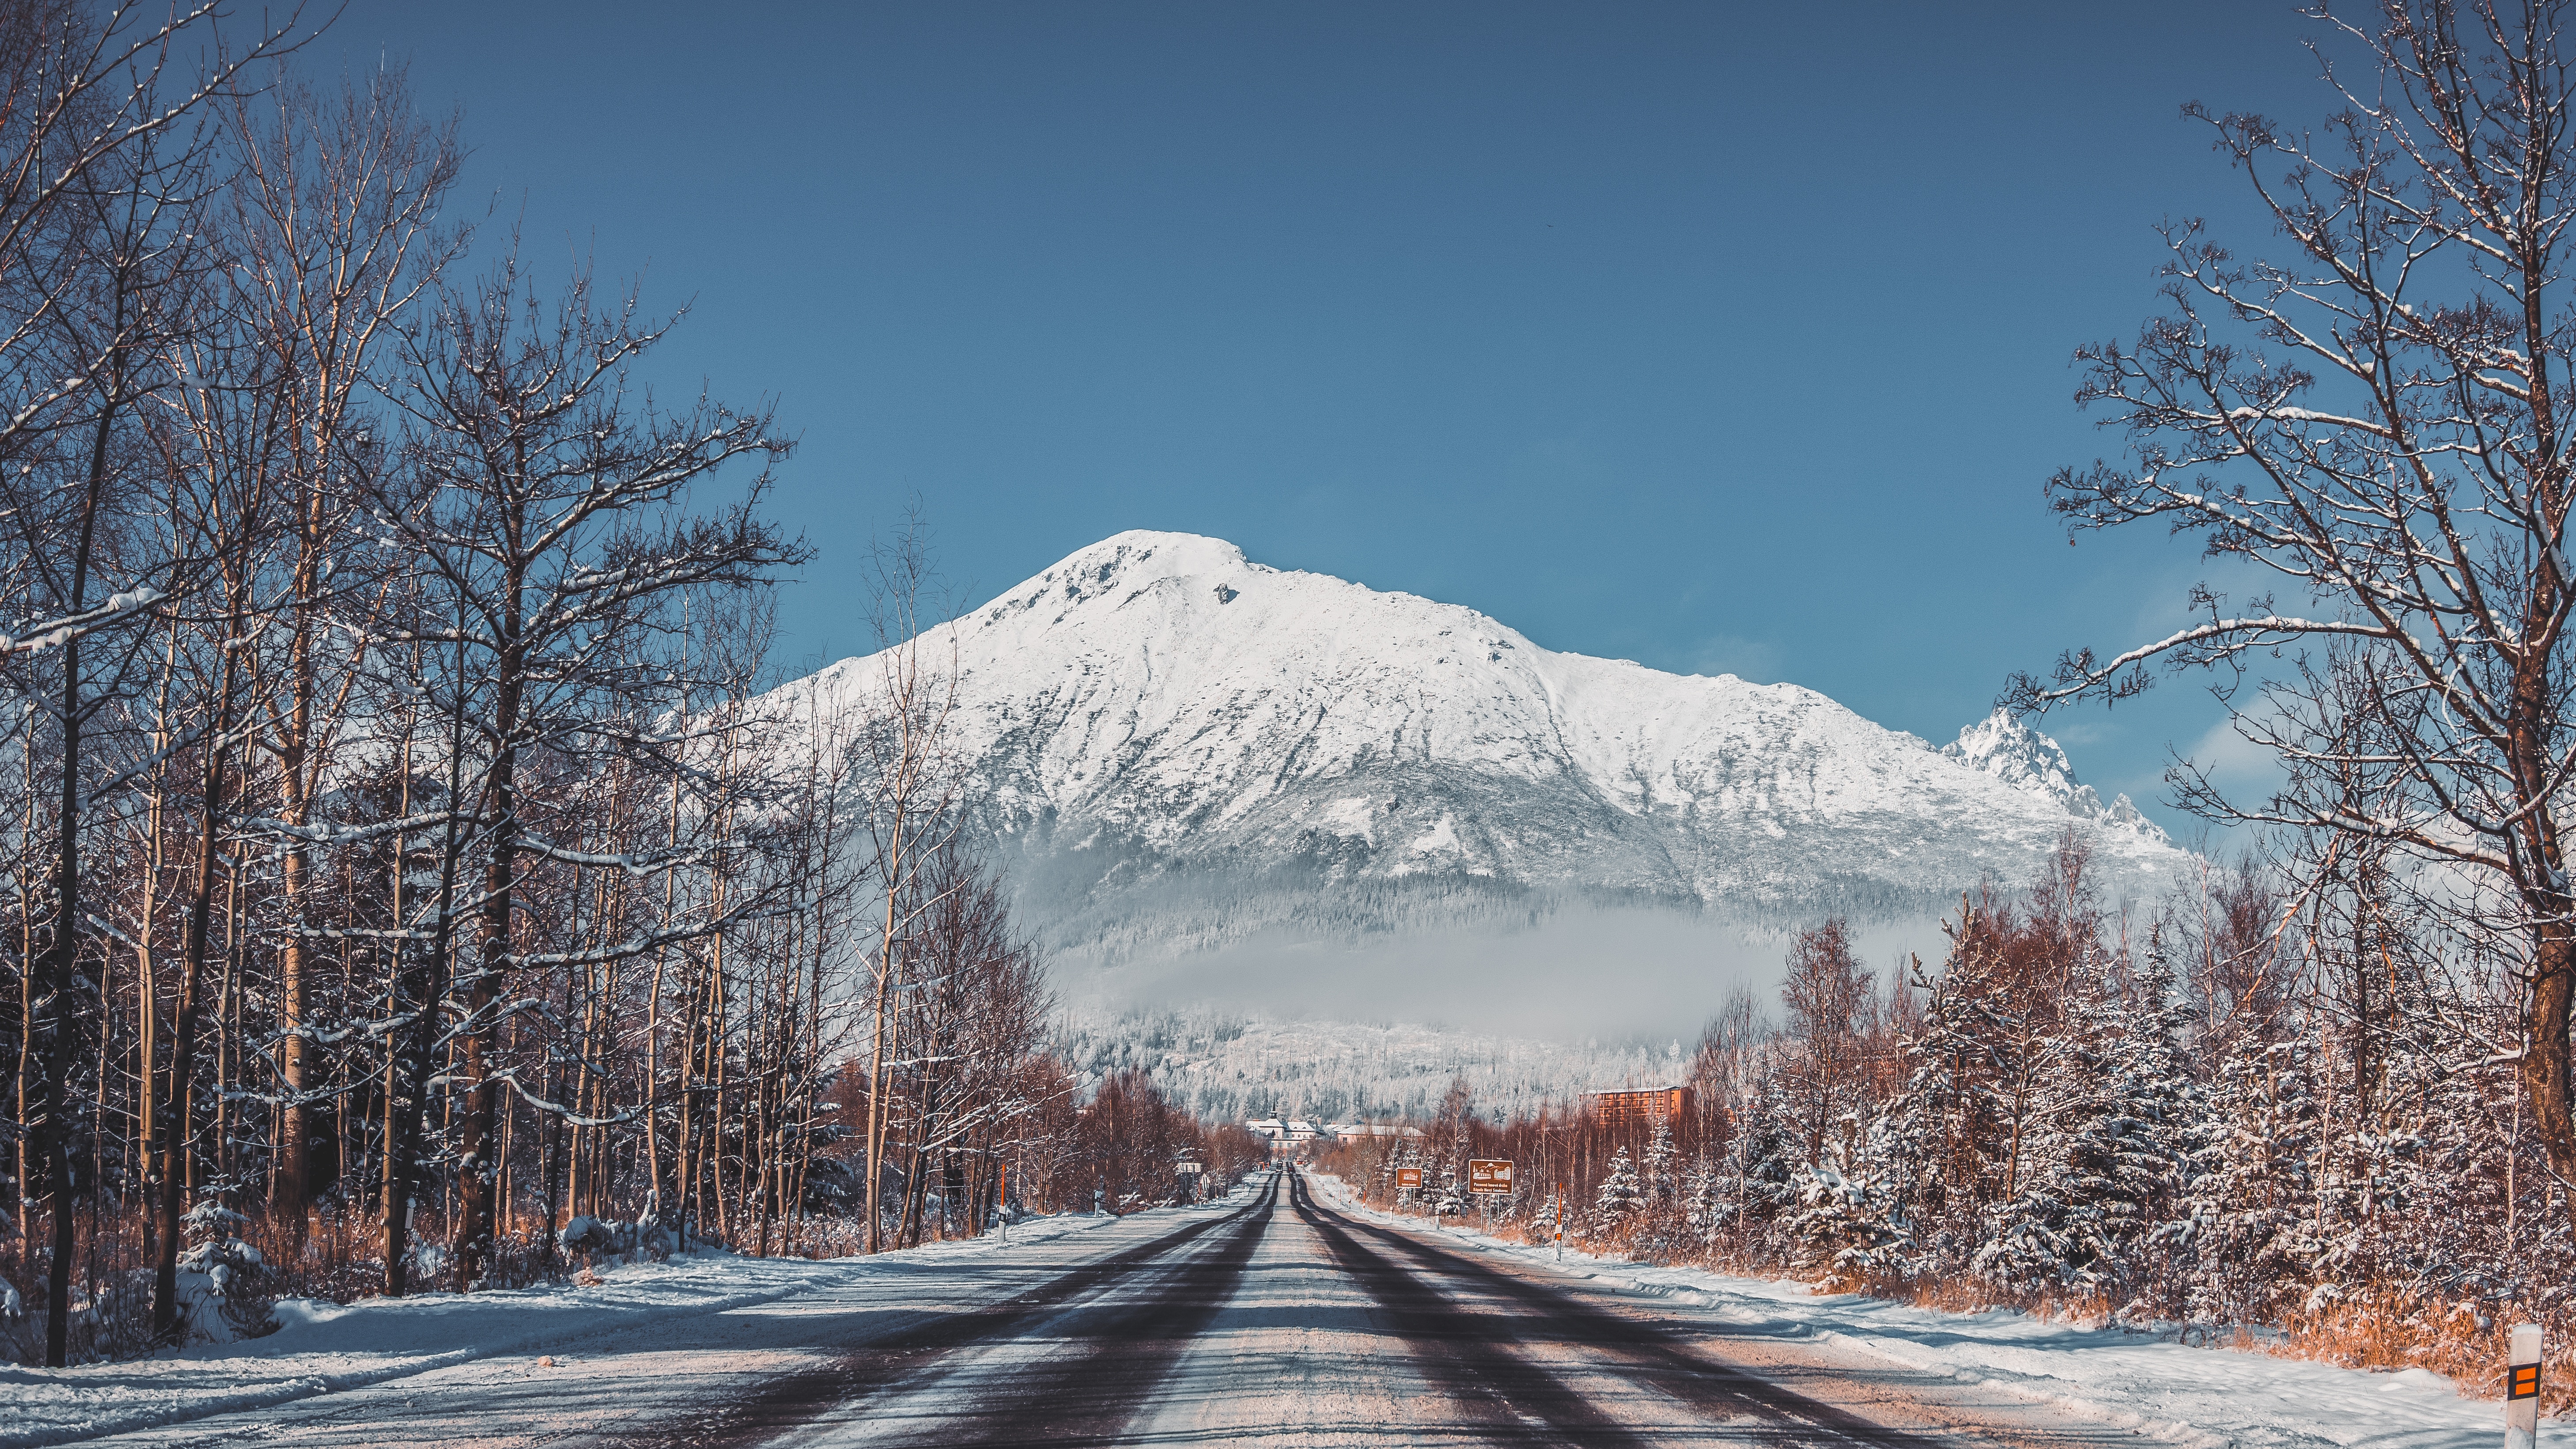 70893 download wallpaper mountains, landscape, winter, nature, trees, snow, road screensavers and pictures for free